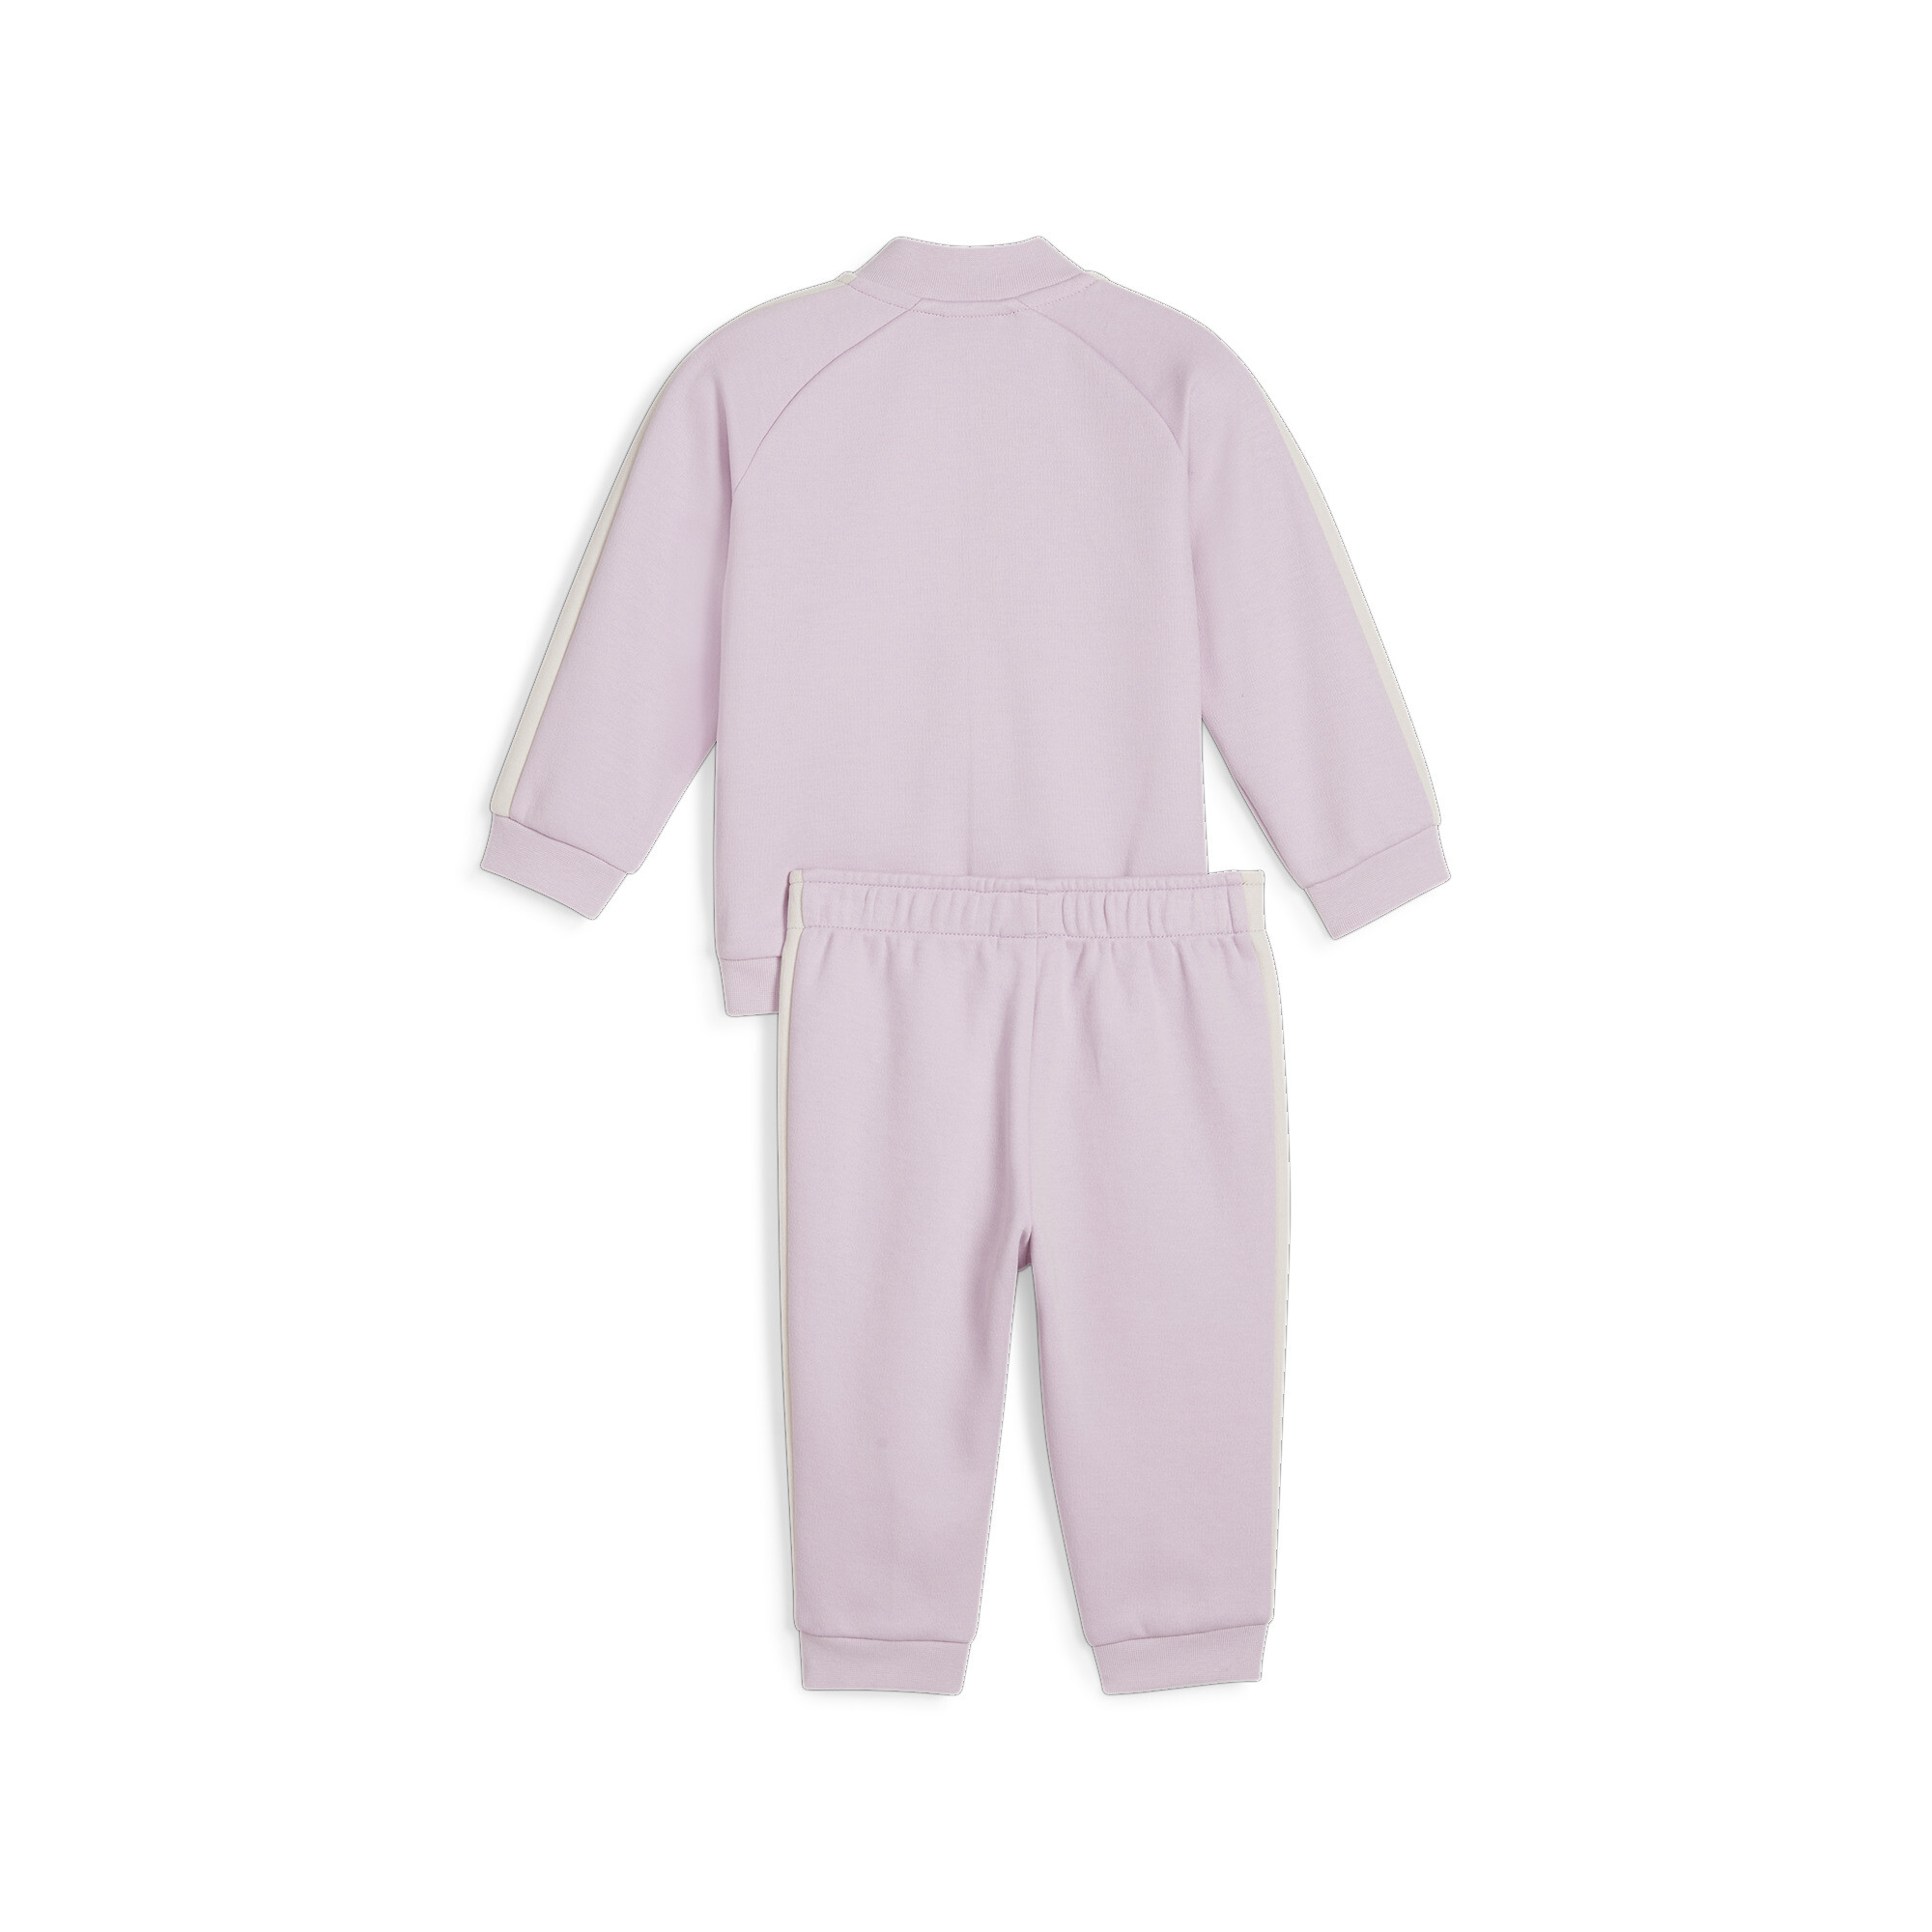 Kids' PUMA MINICATS T7 ICONIC Baby Tracksuit Set In Purple, Size 4-6 Months